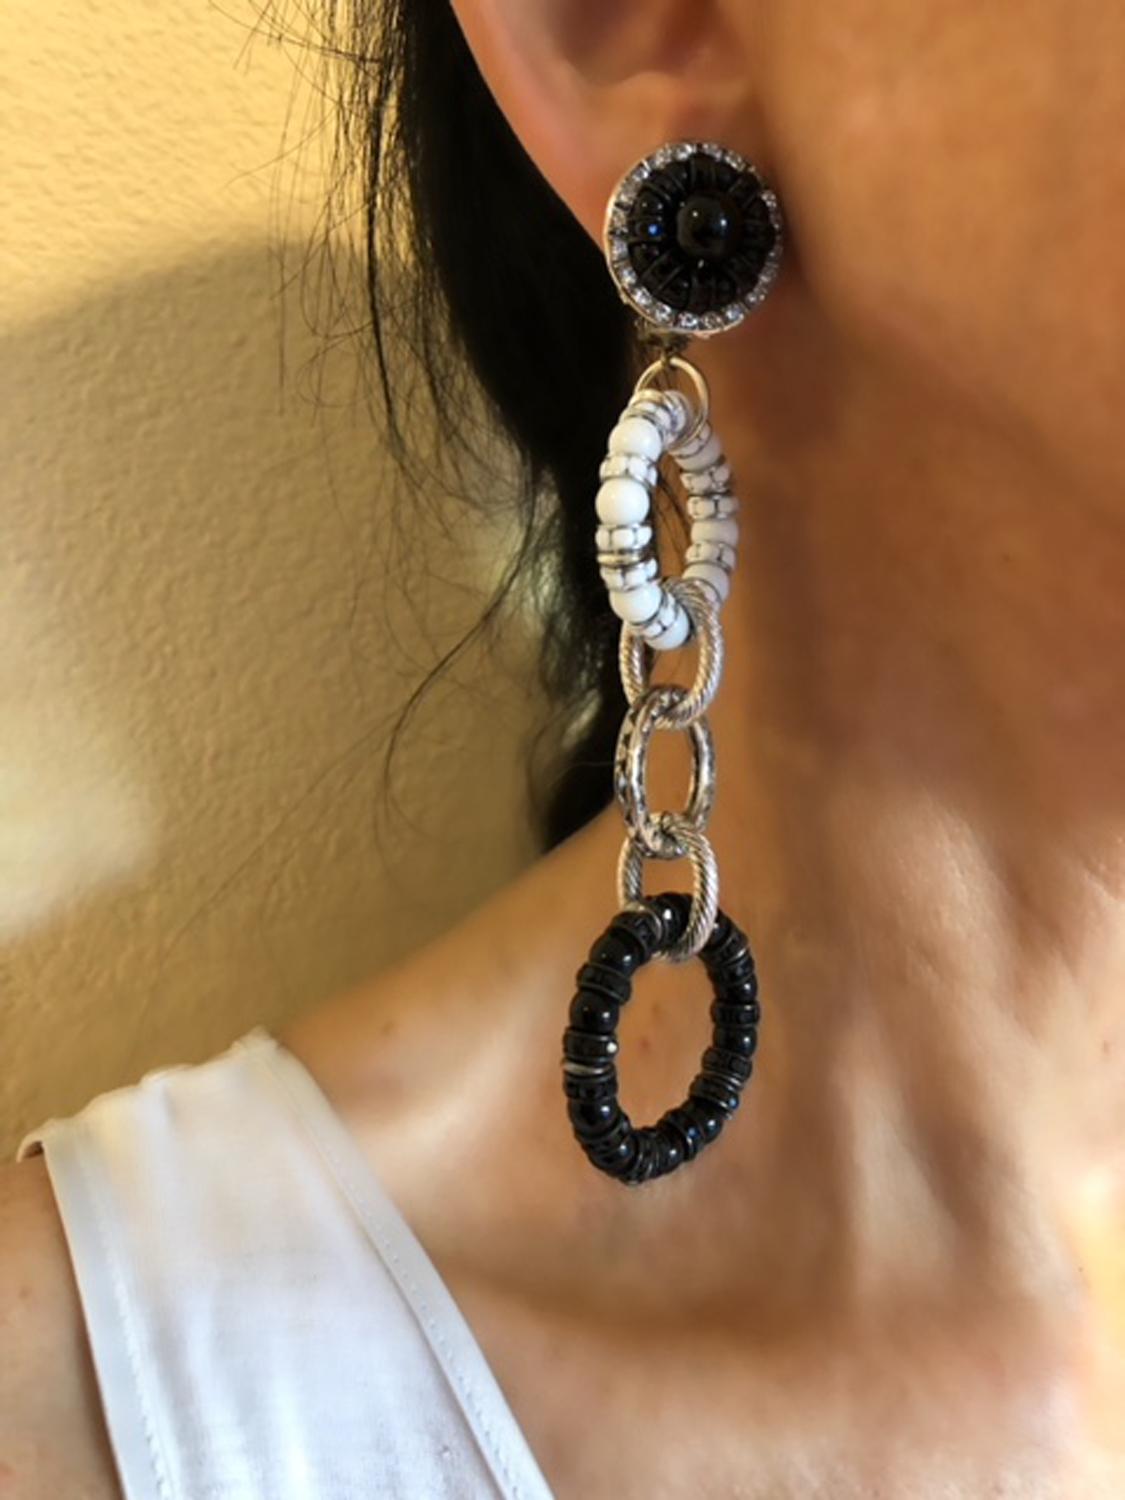 A dramatic and stylish pair of architectural clip-on earrings, comprised of three beaded (glass beads) circles in black, white and clear rhinestones. The earrings were handcrafted in Paris by the house of Francoise Montague.

Note: Our model said